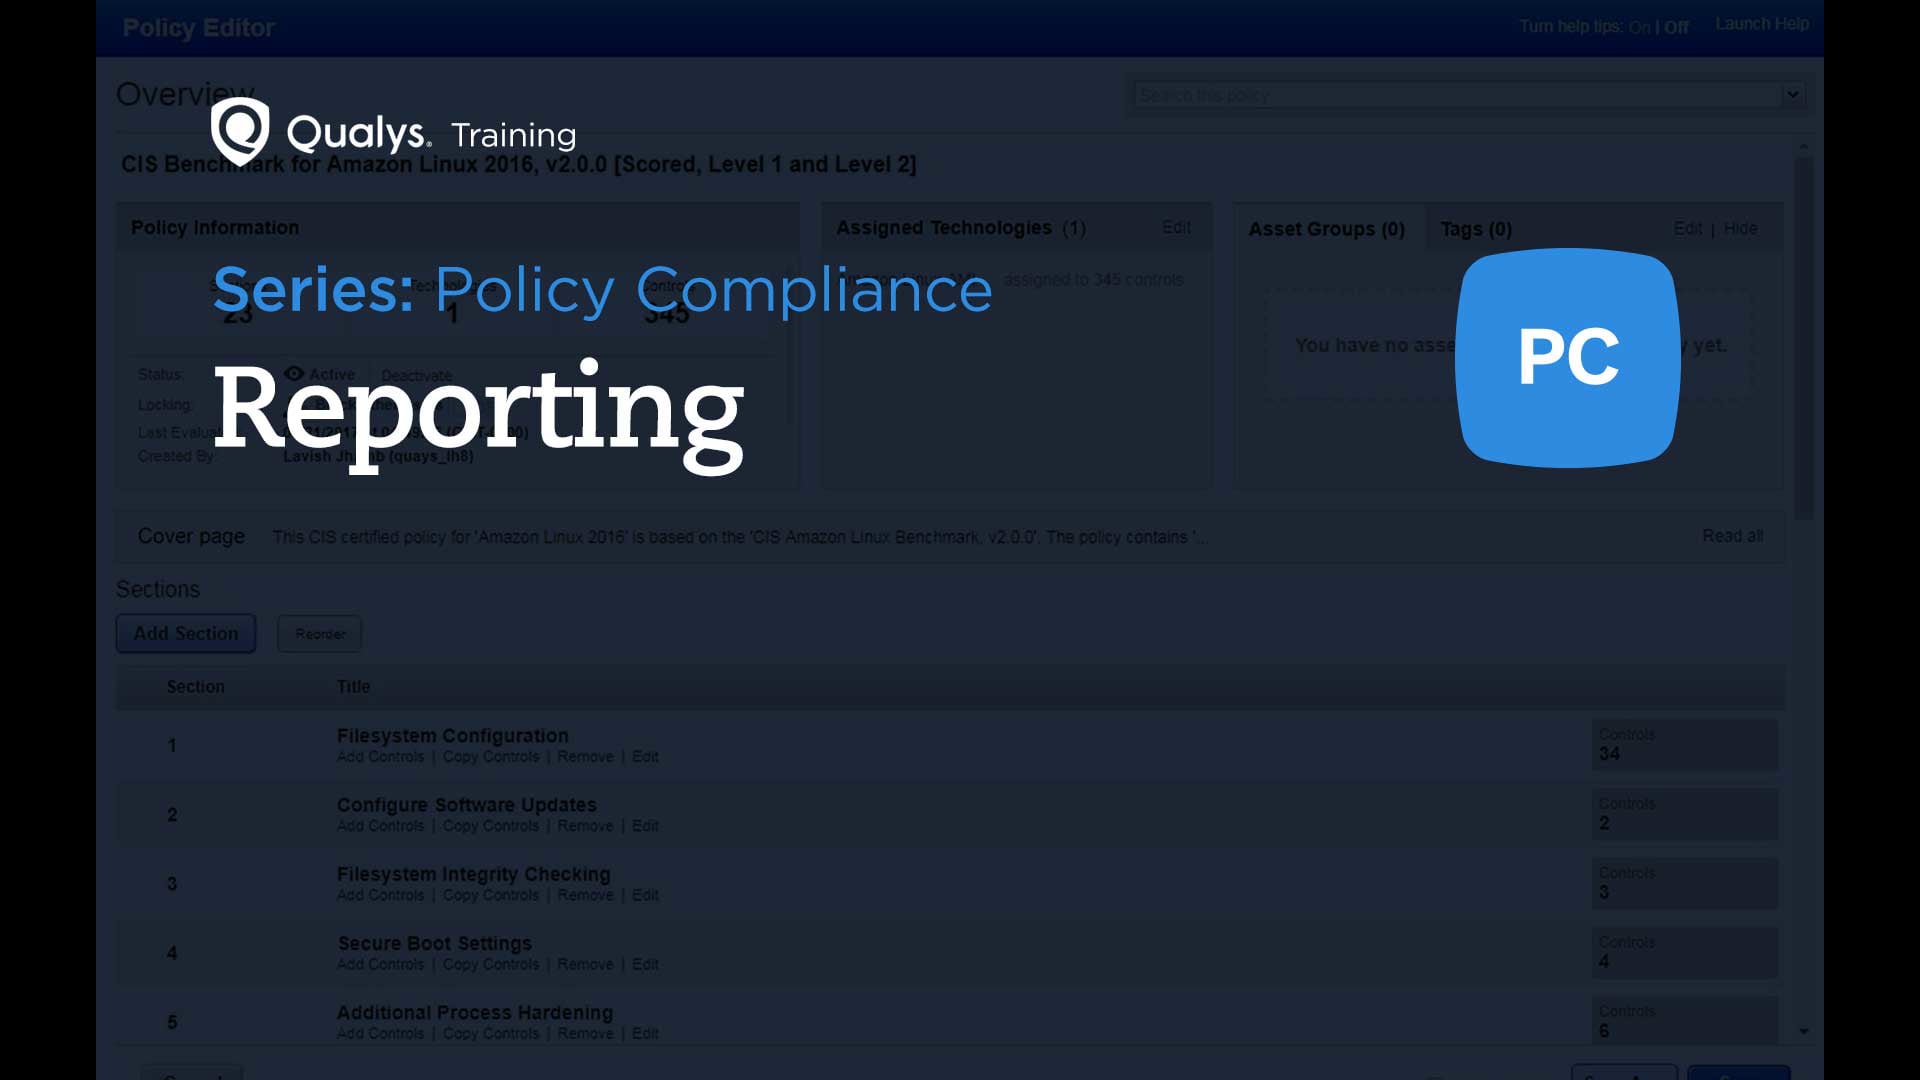 Compliance Reports